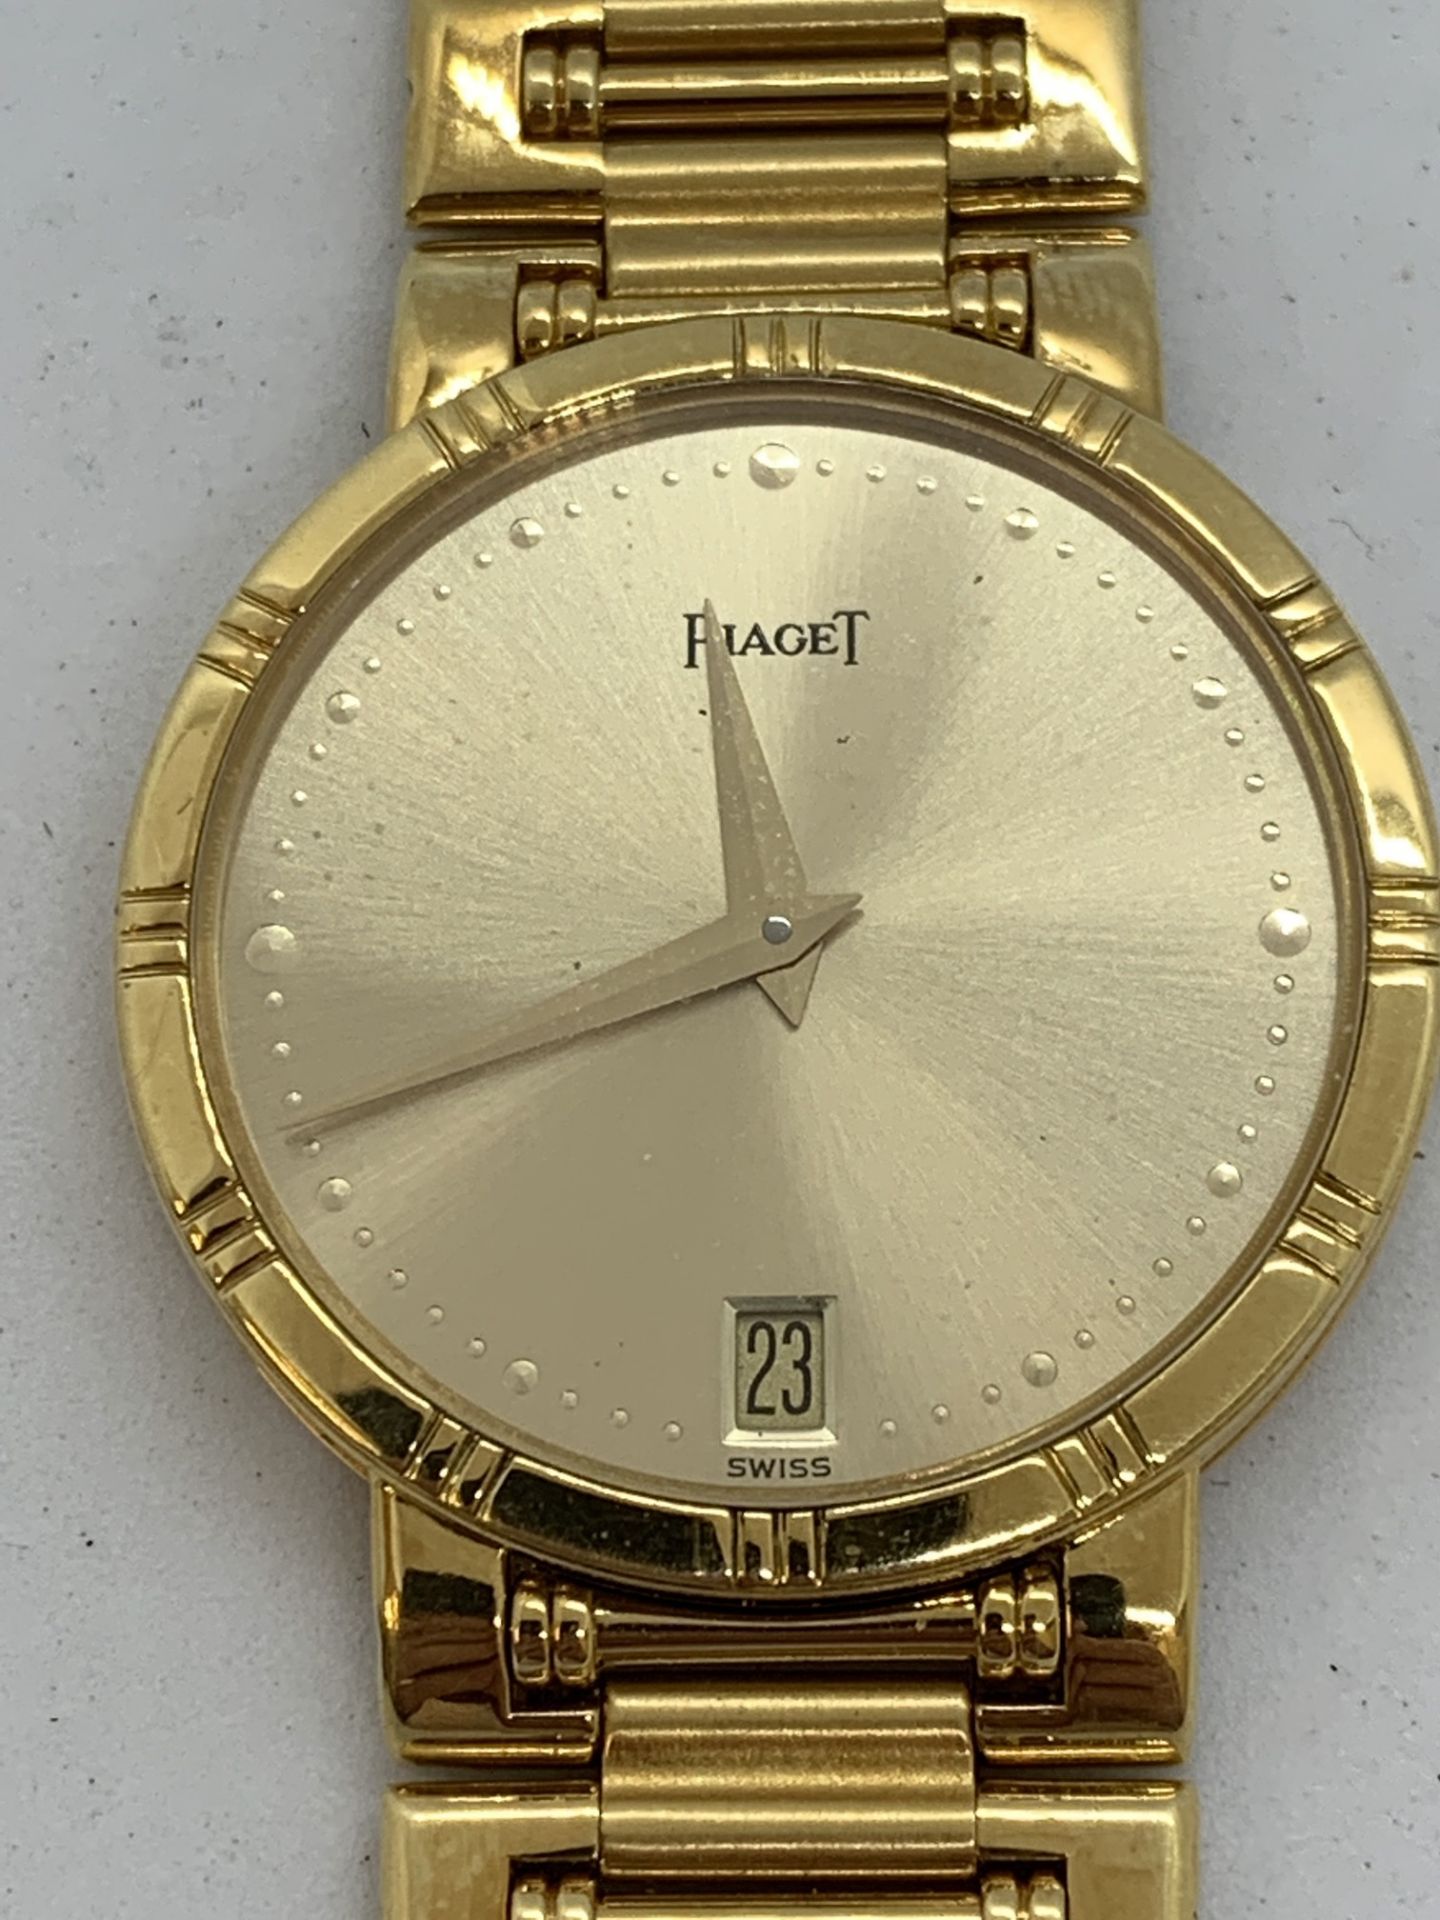 18ct GOLD PIAGET WATCH - 83 GRAMS APPROX